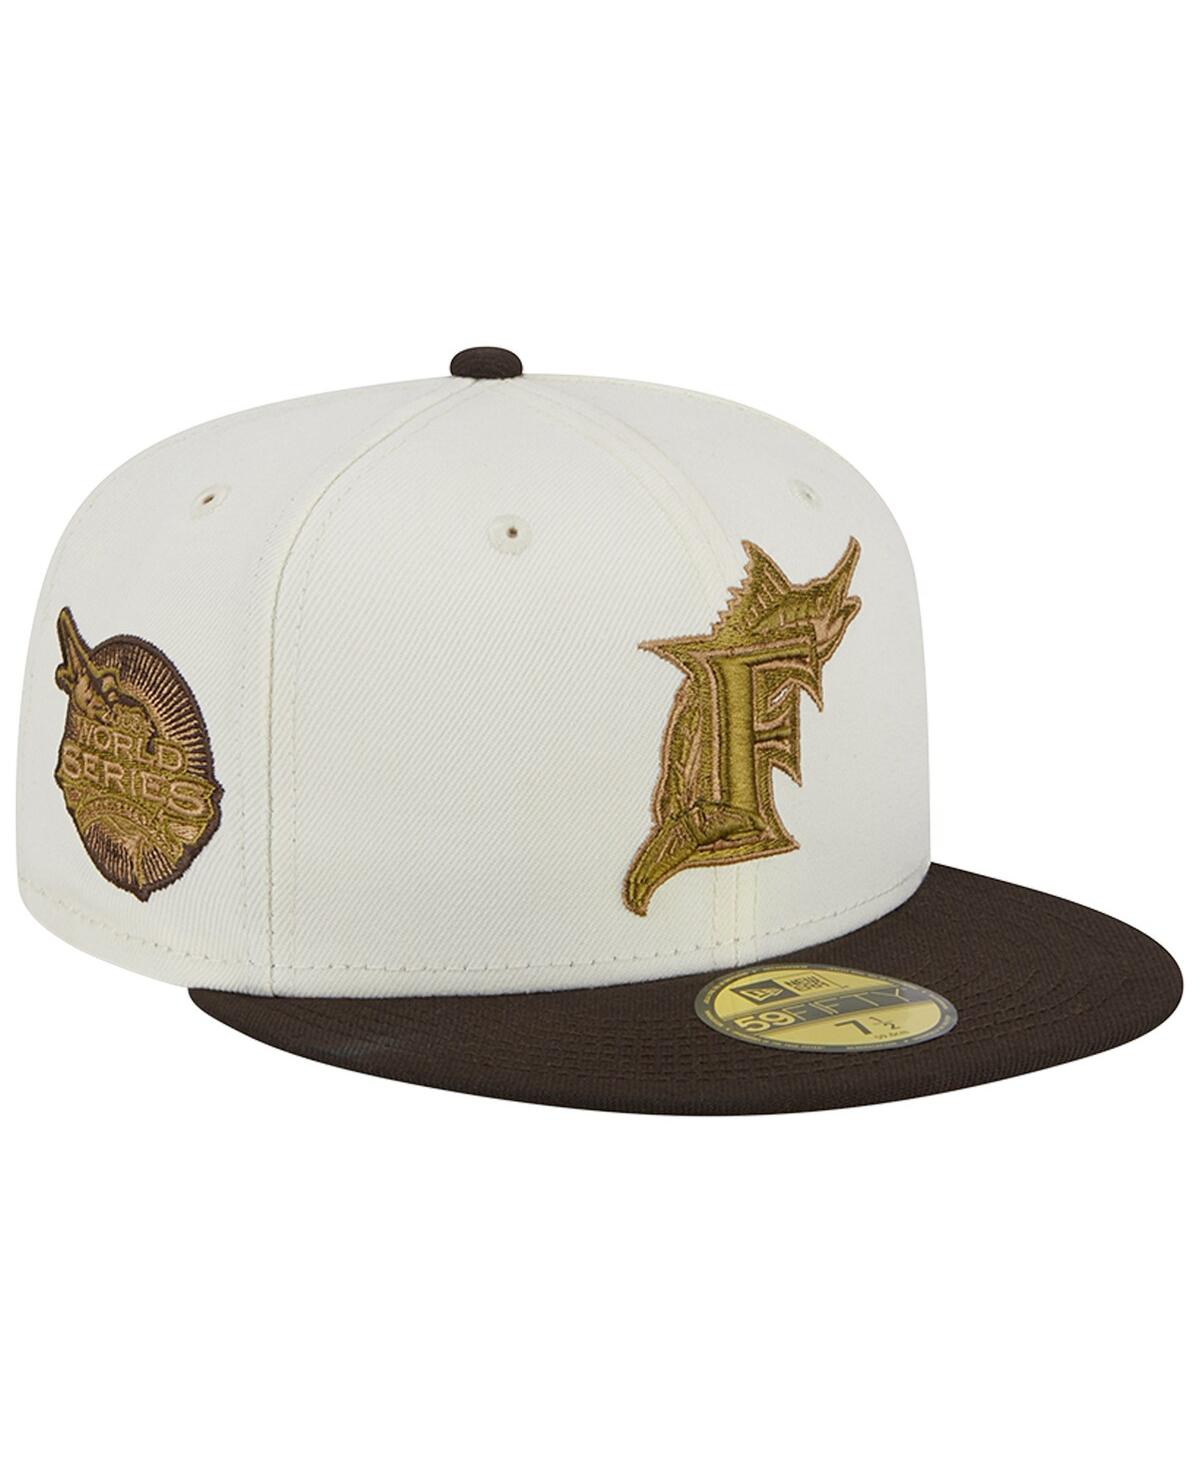 NEW ERA MEN'S NEW ERA CREAM, BROWN FLORIDA MARLINS COOPERSTOWN COLLECTION 2003 WORLD SERIES 59FIFTY FITTED H